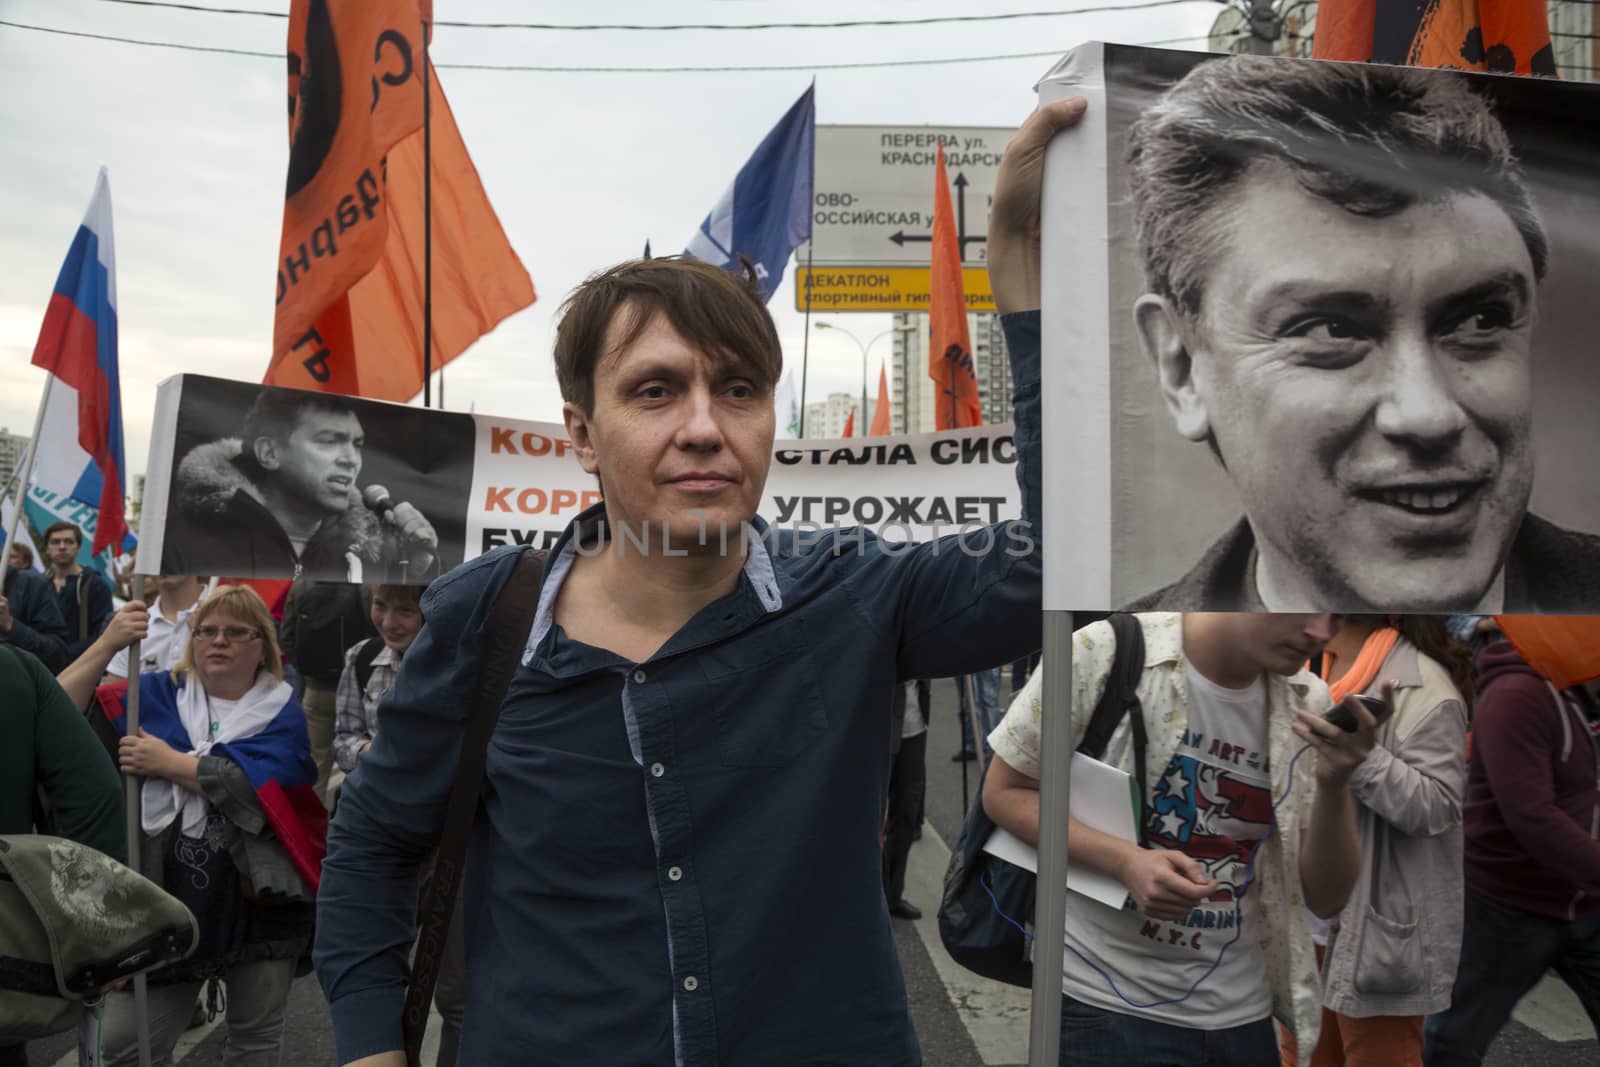 MOSCOW - 2015 ELECTIONS - OPPOSITION PROTEST by newzulu